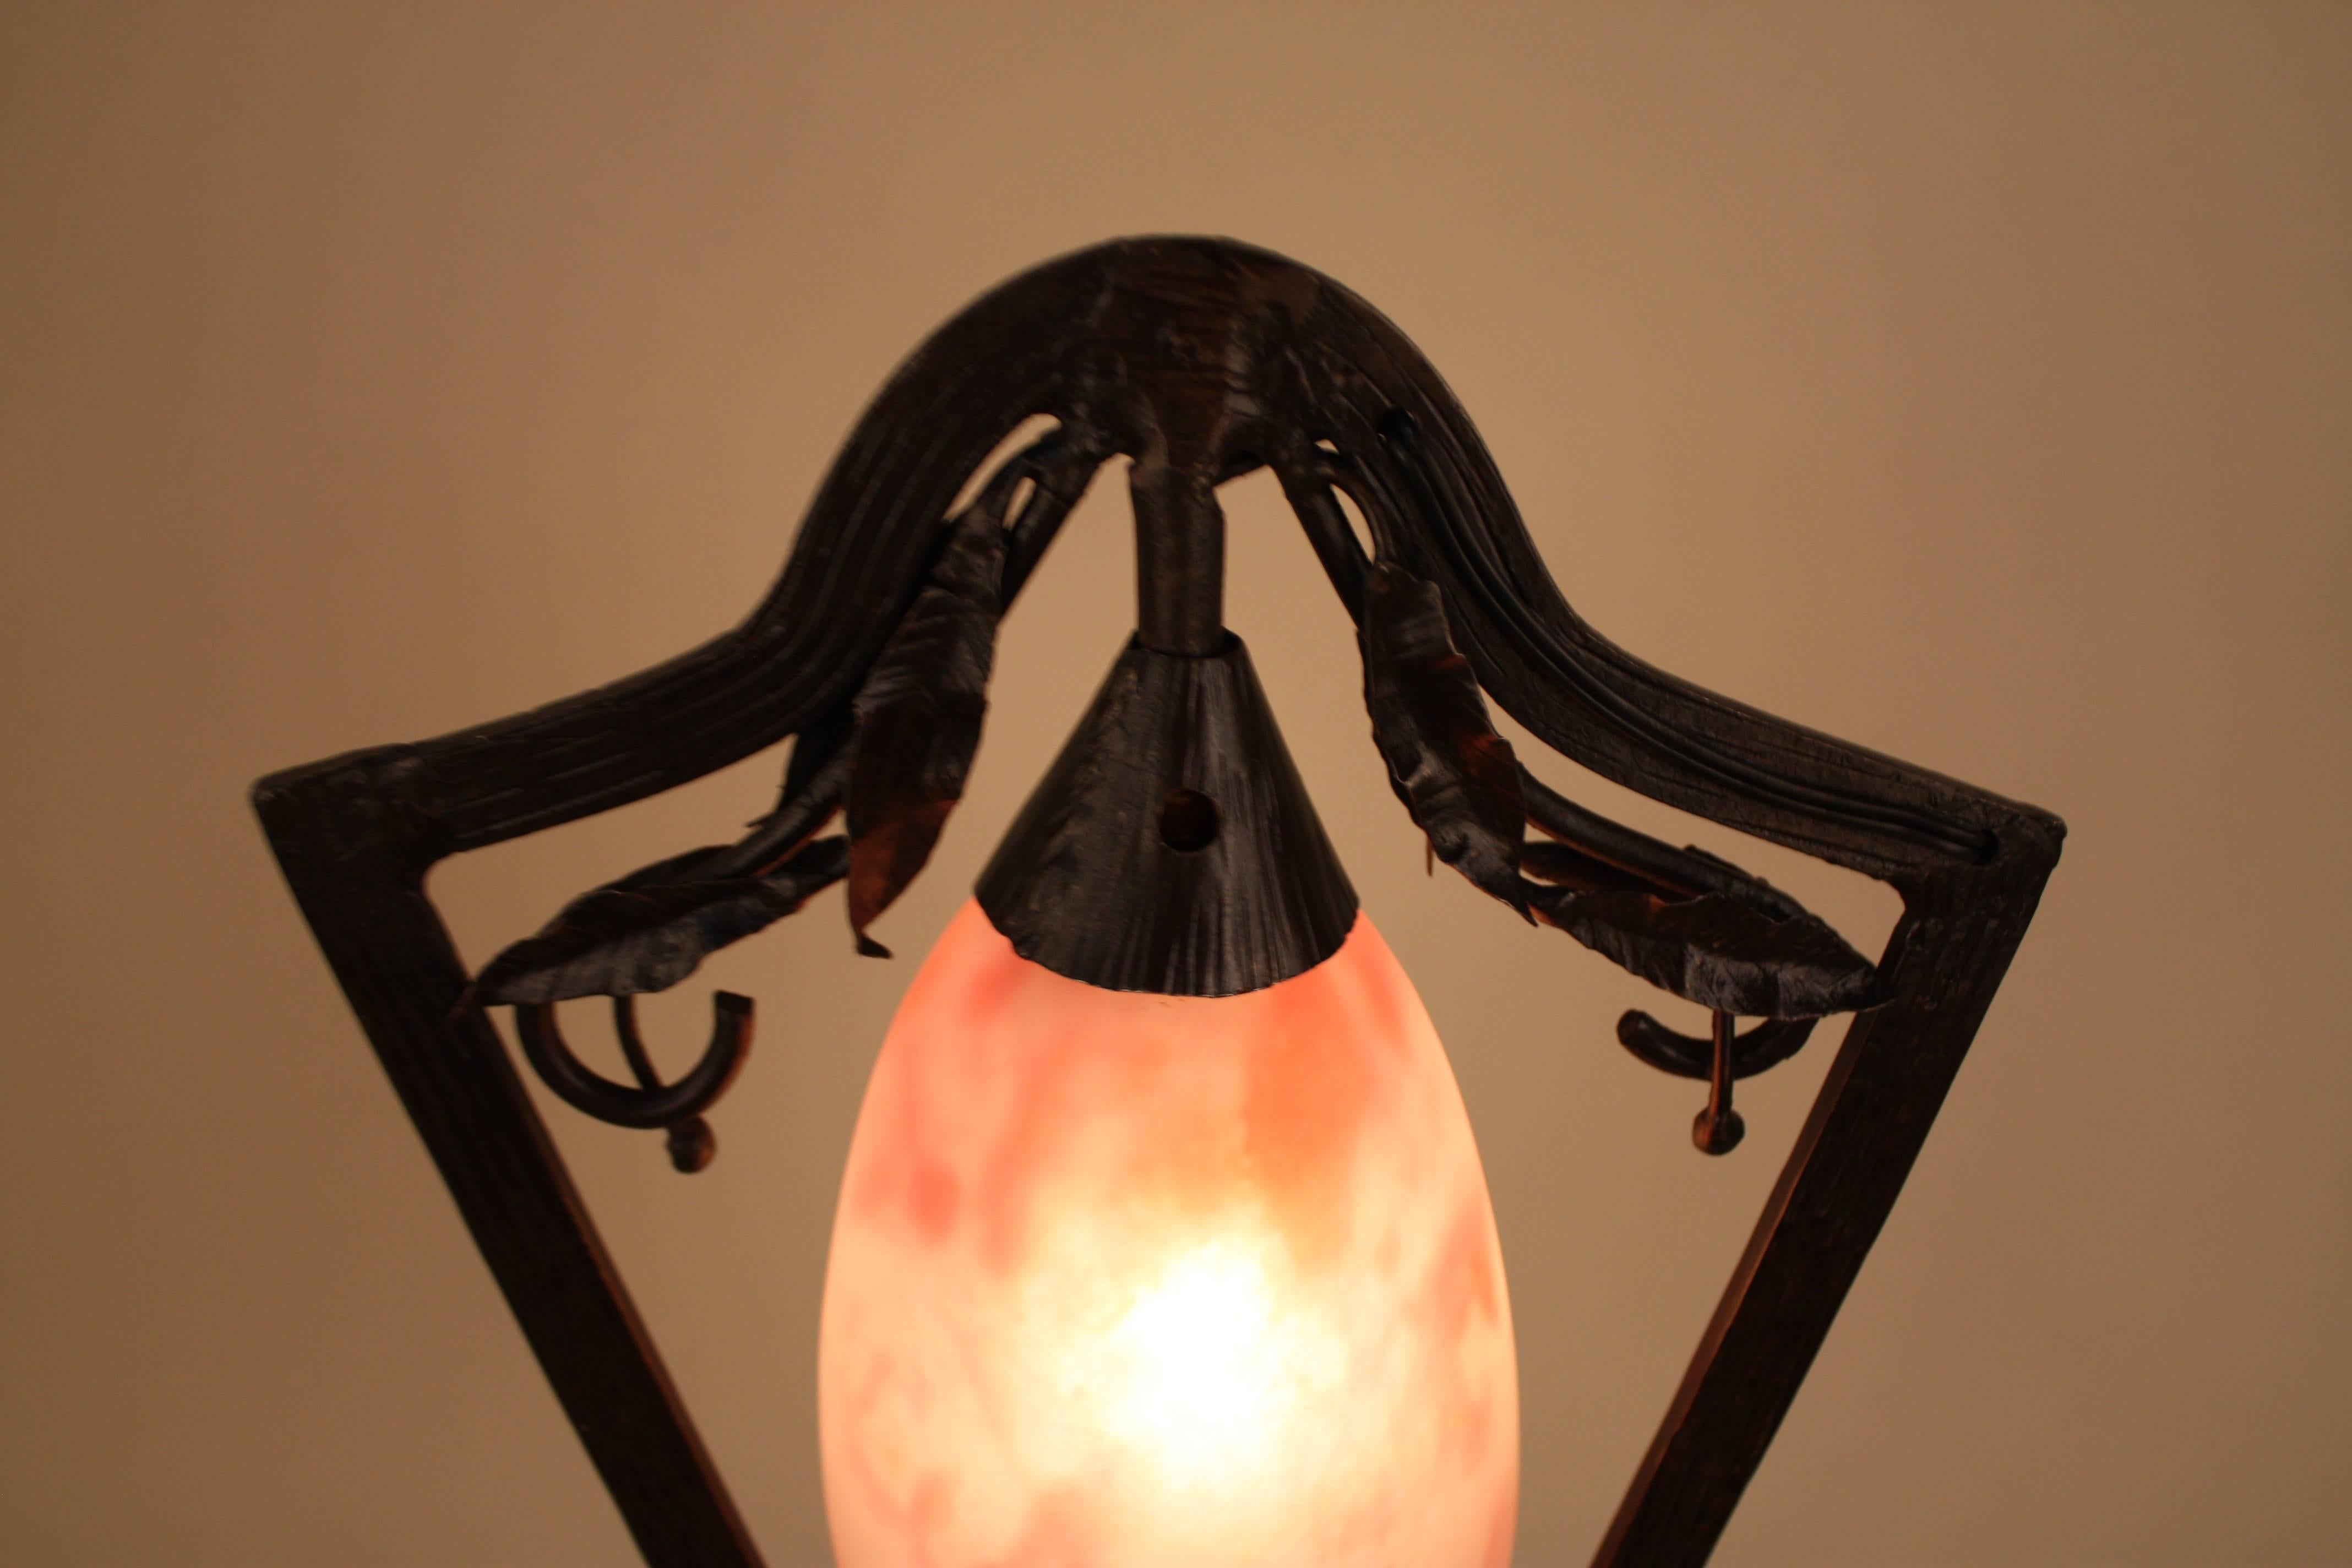 Outstanding Art Nouveau handblown glass and wrought iron table lamp by Daum Nancy.